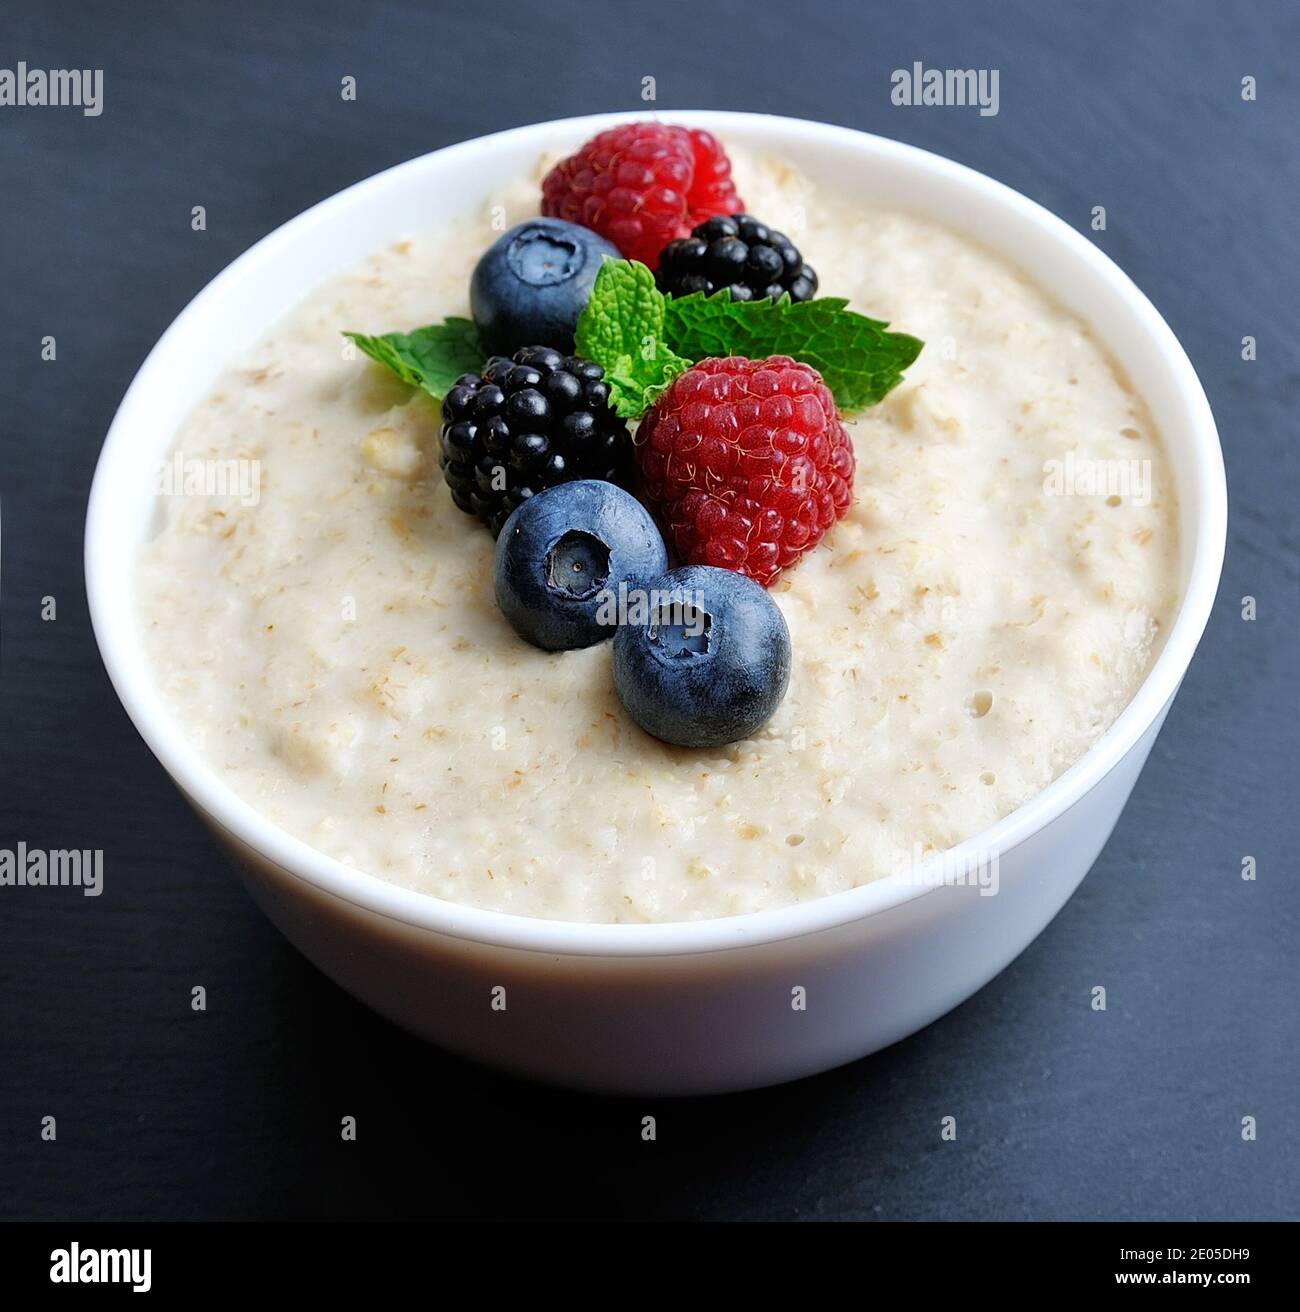 Healthy breakfast. Porridge bowl with berries on a black graphite background. Stock Photo